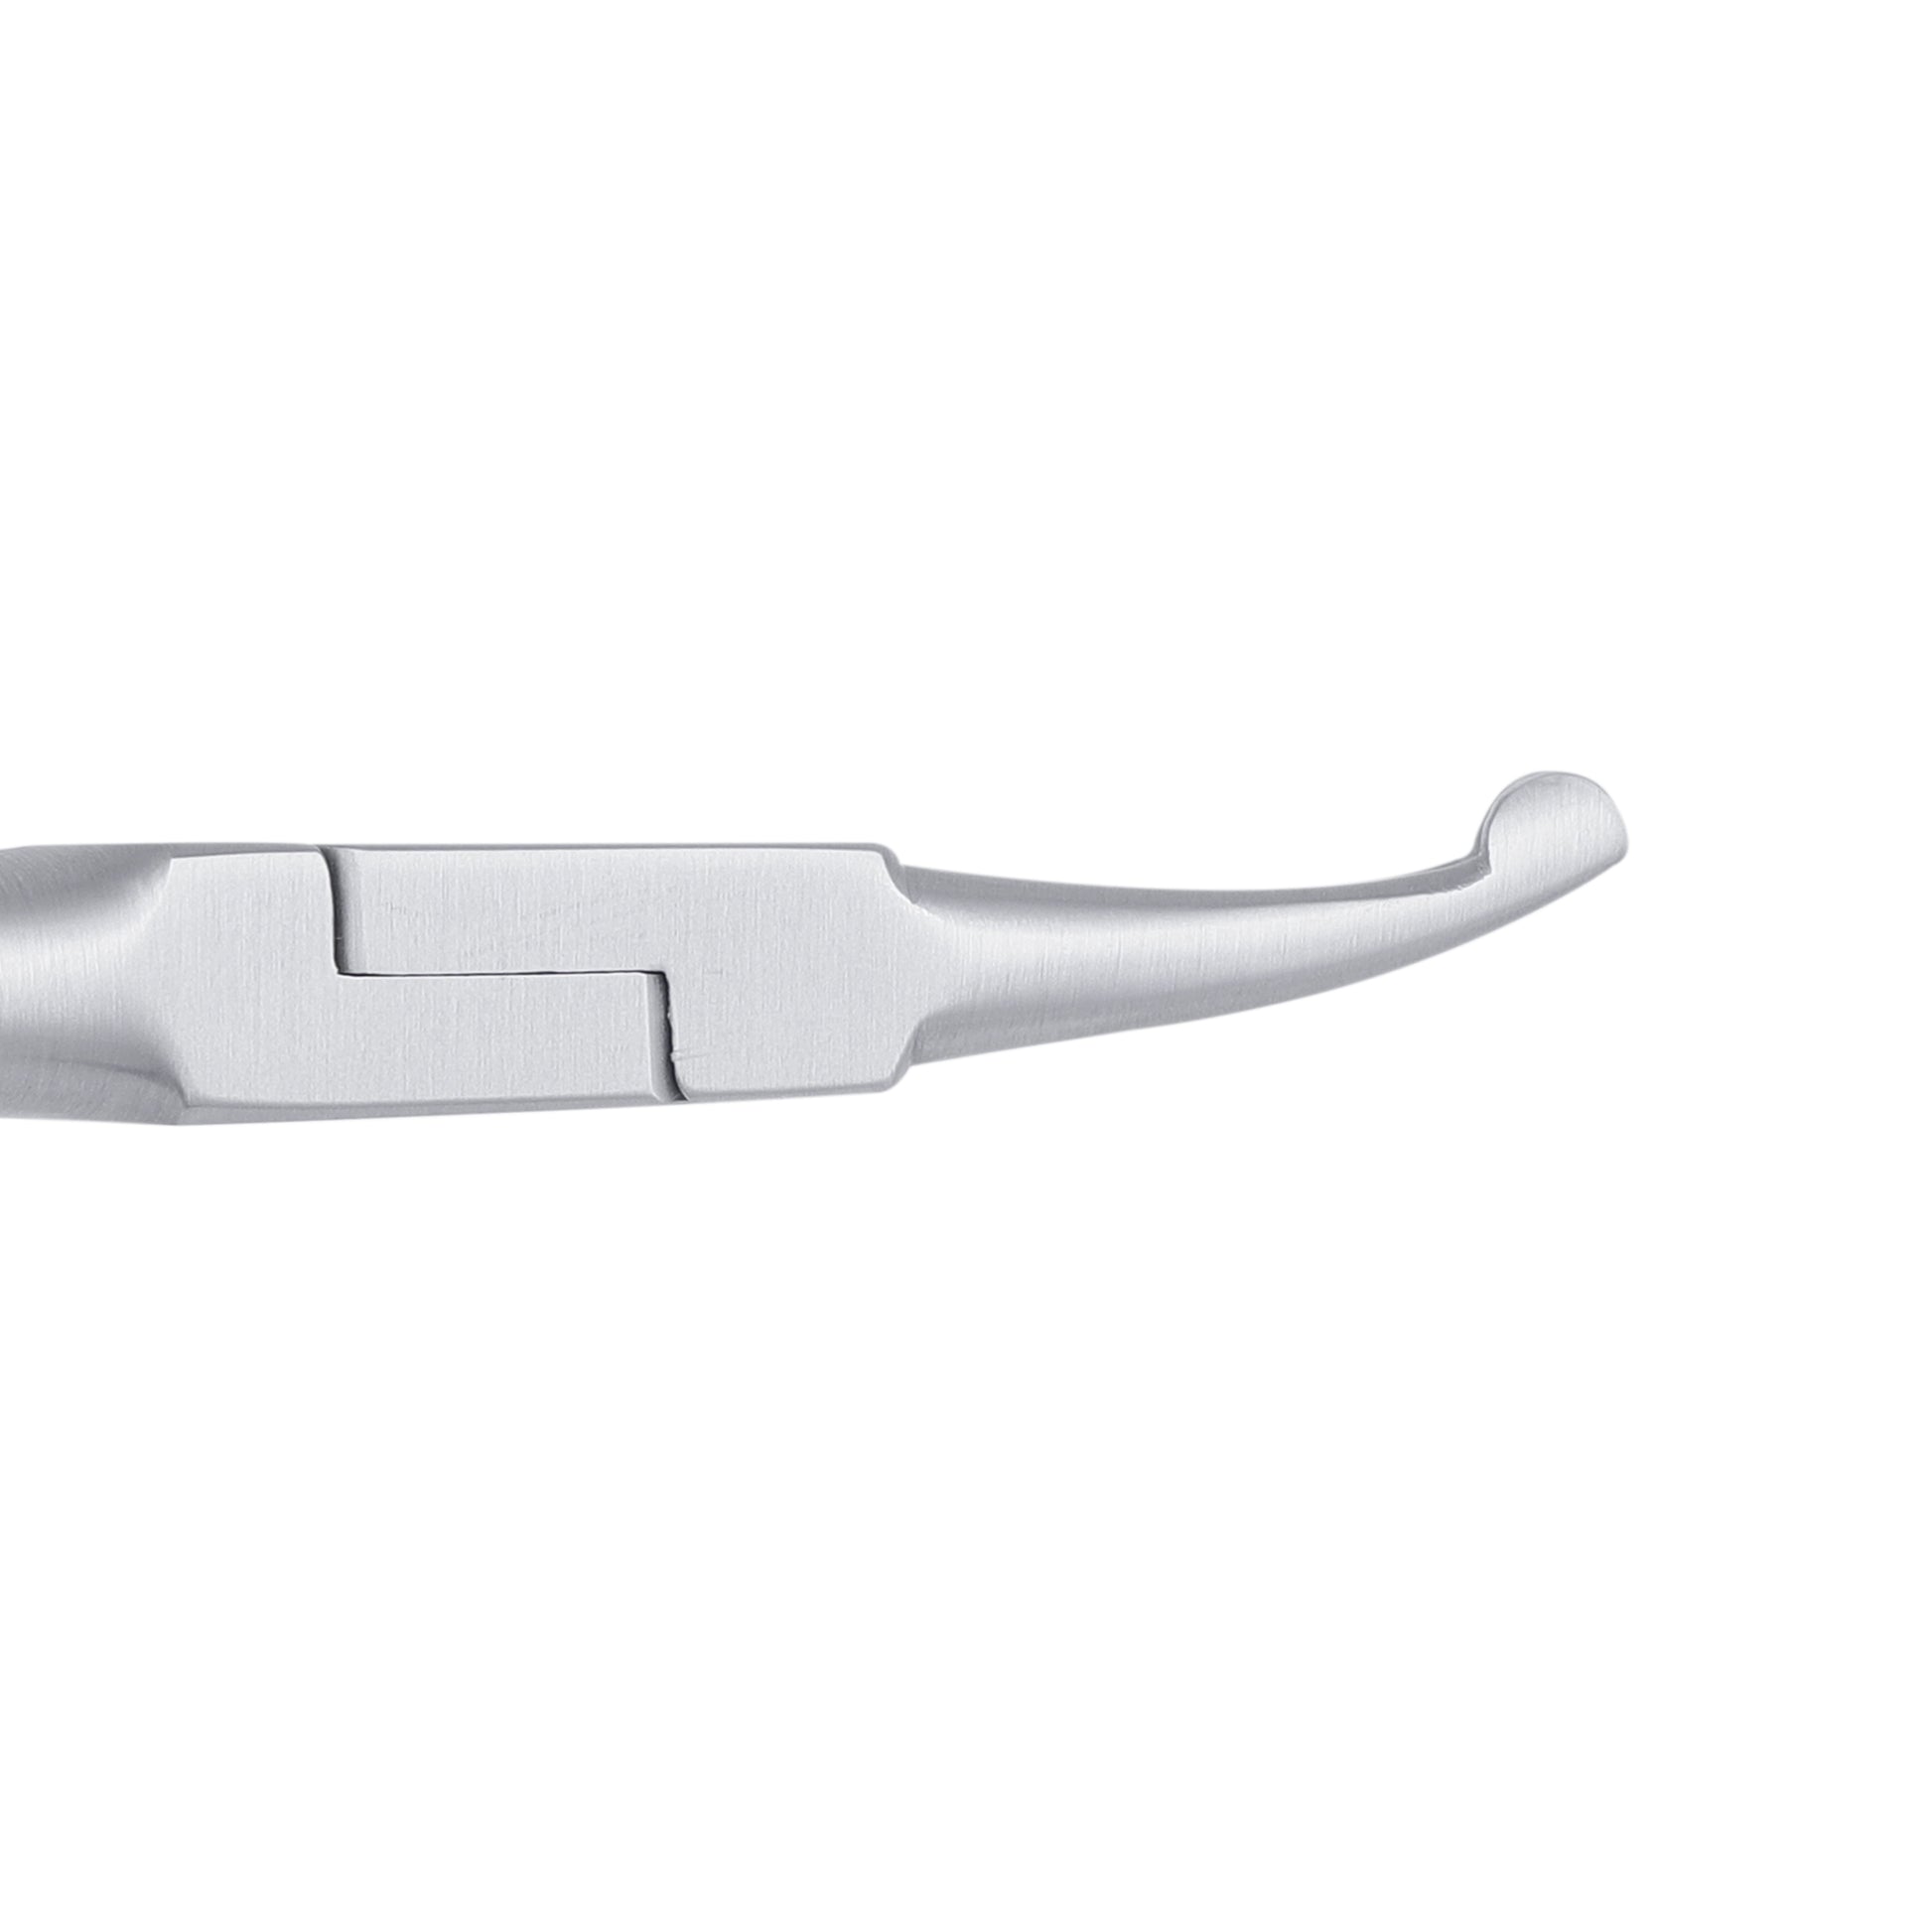 How Pliers, Offset - HiTeck Medical Instruments